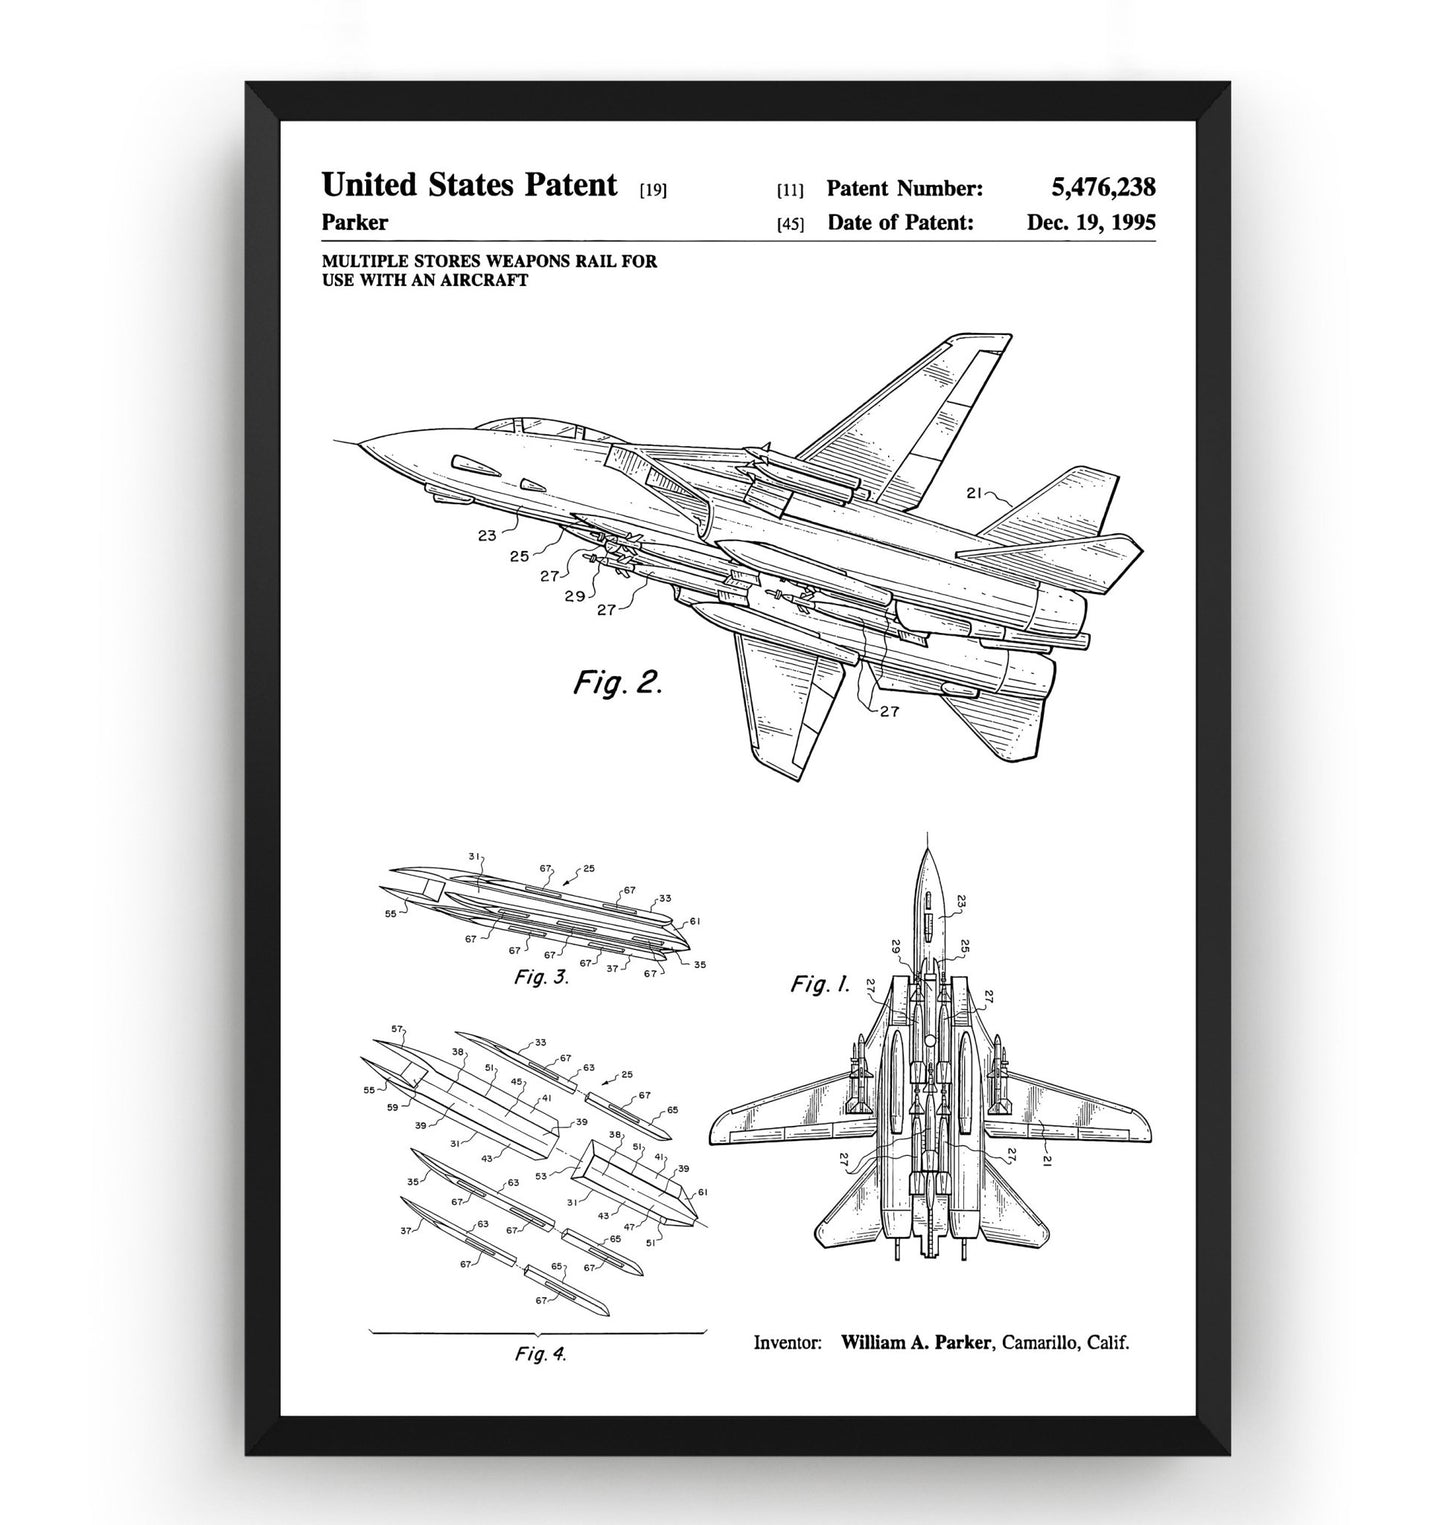 Aircraft Weapons Rail 1955 Patent Print - Magic Posters